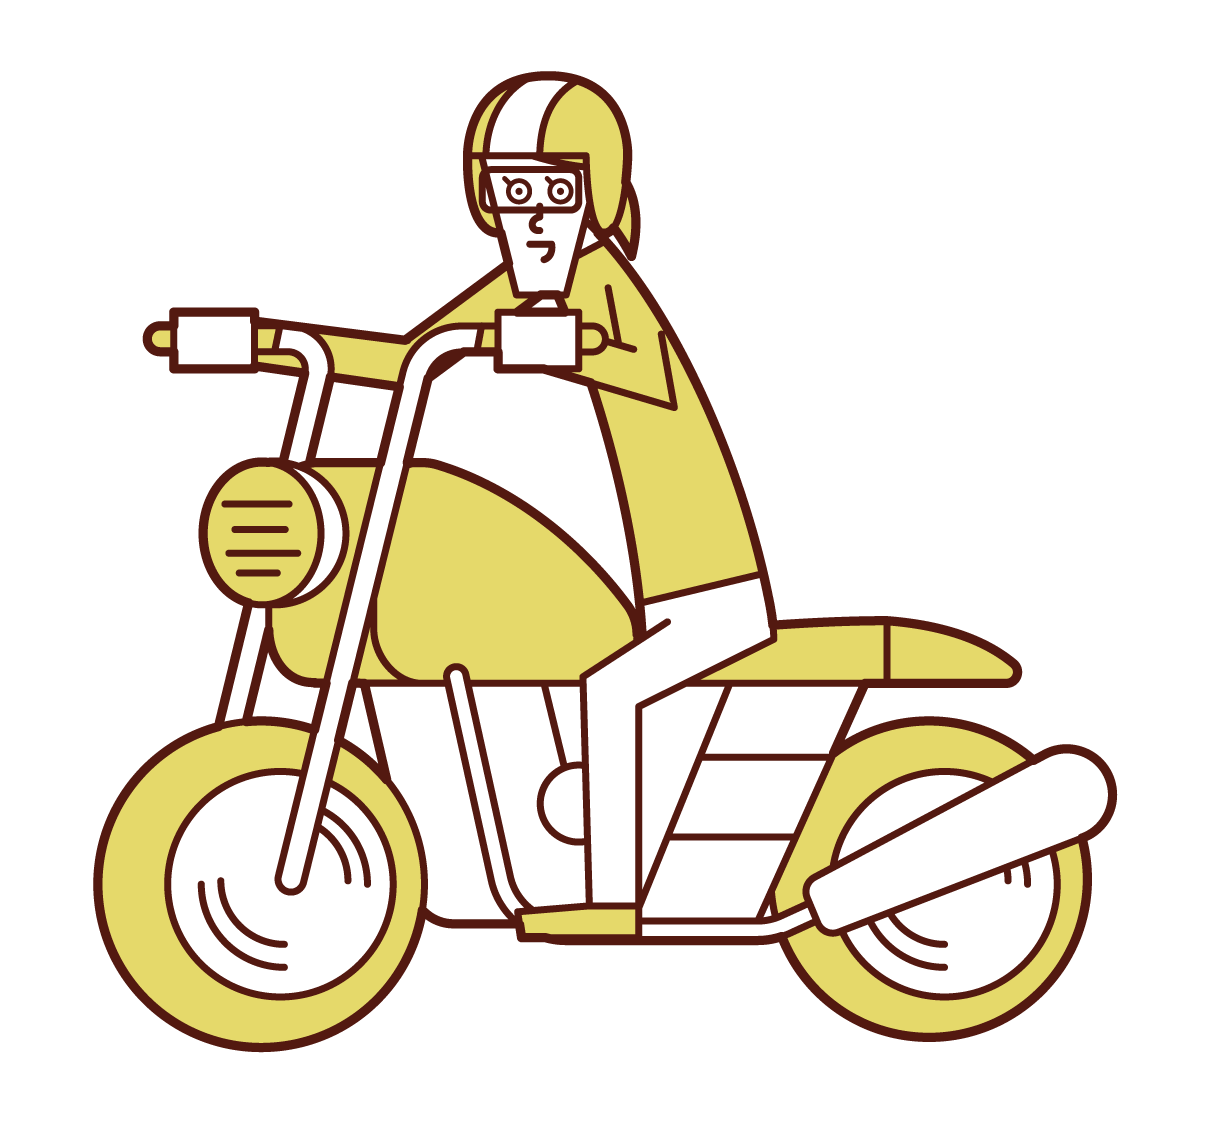 Illustration of a woman driving a motorcycle